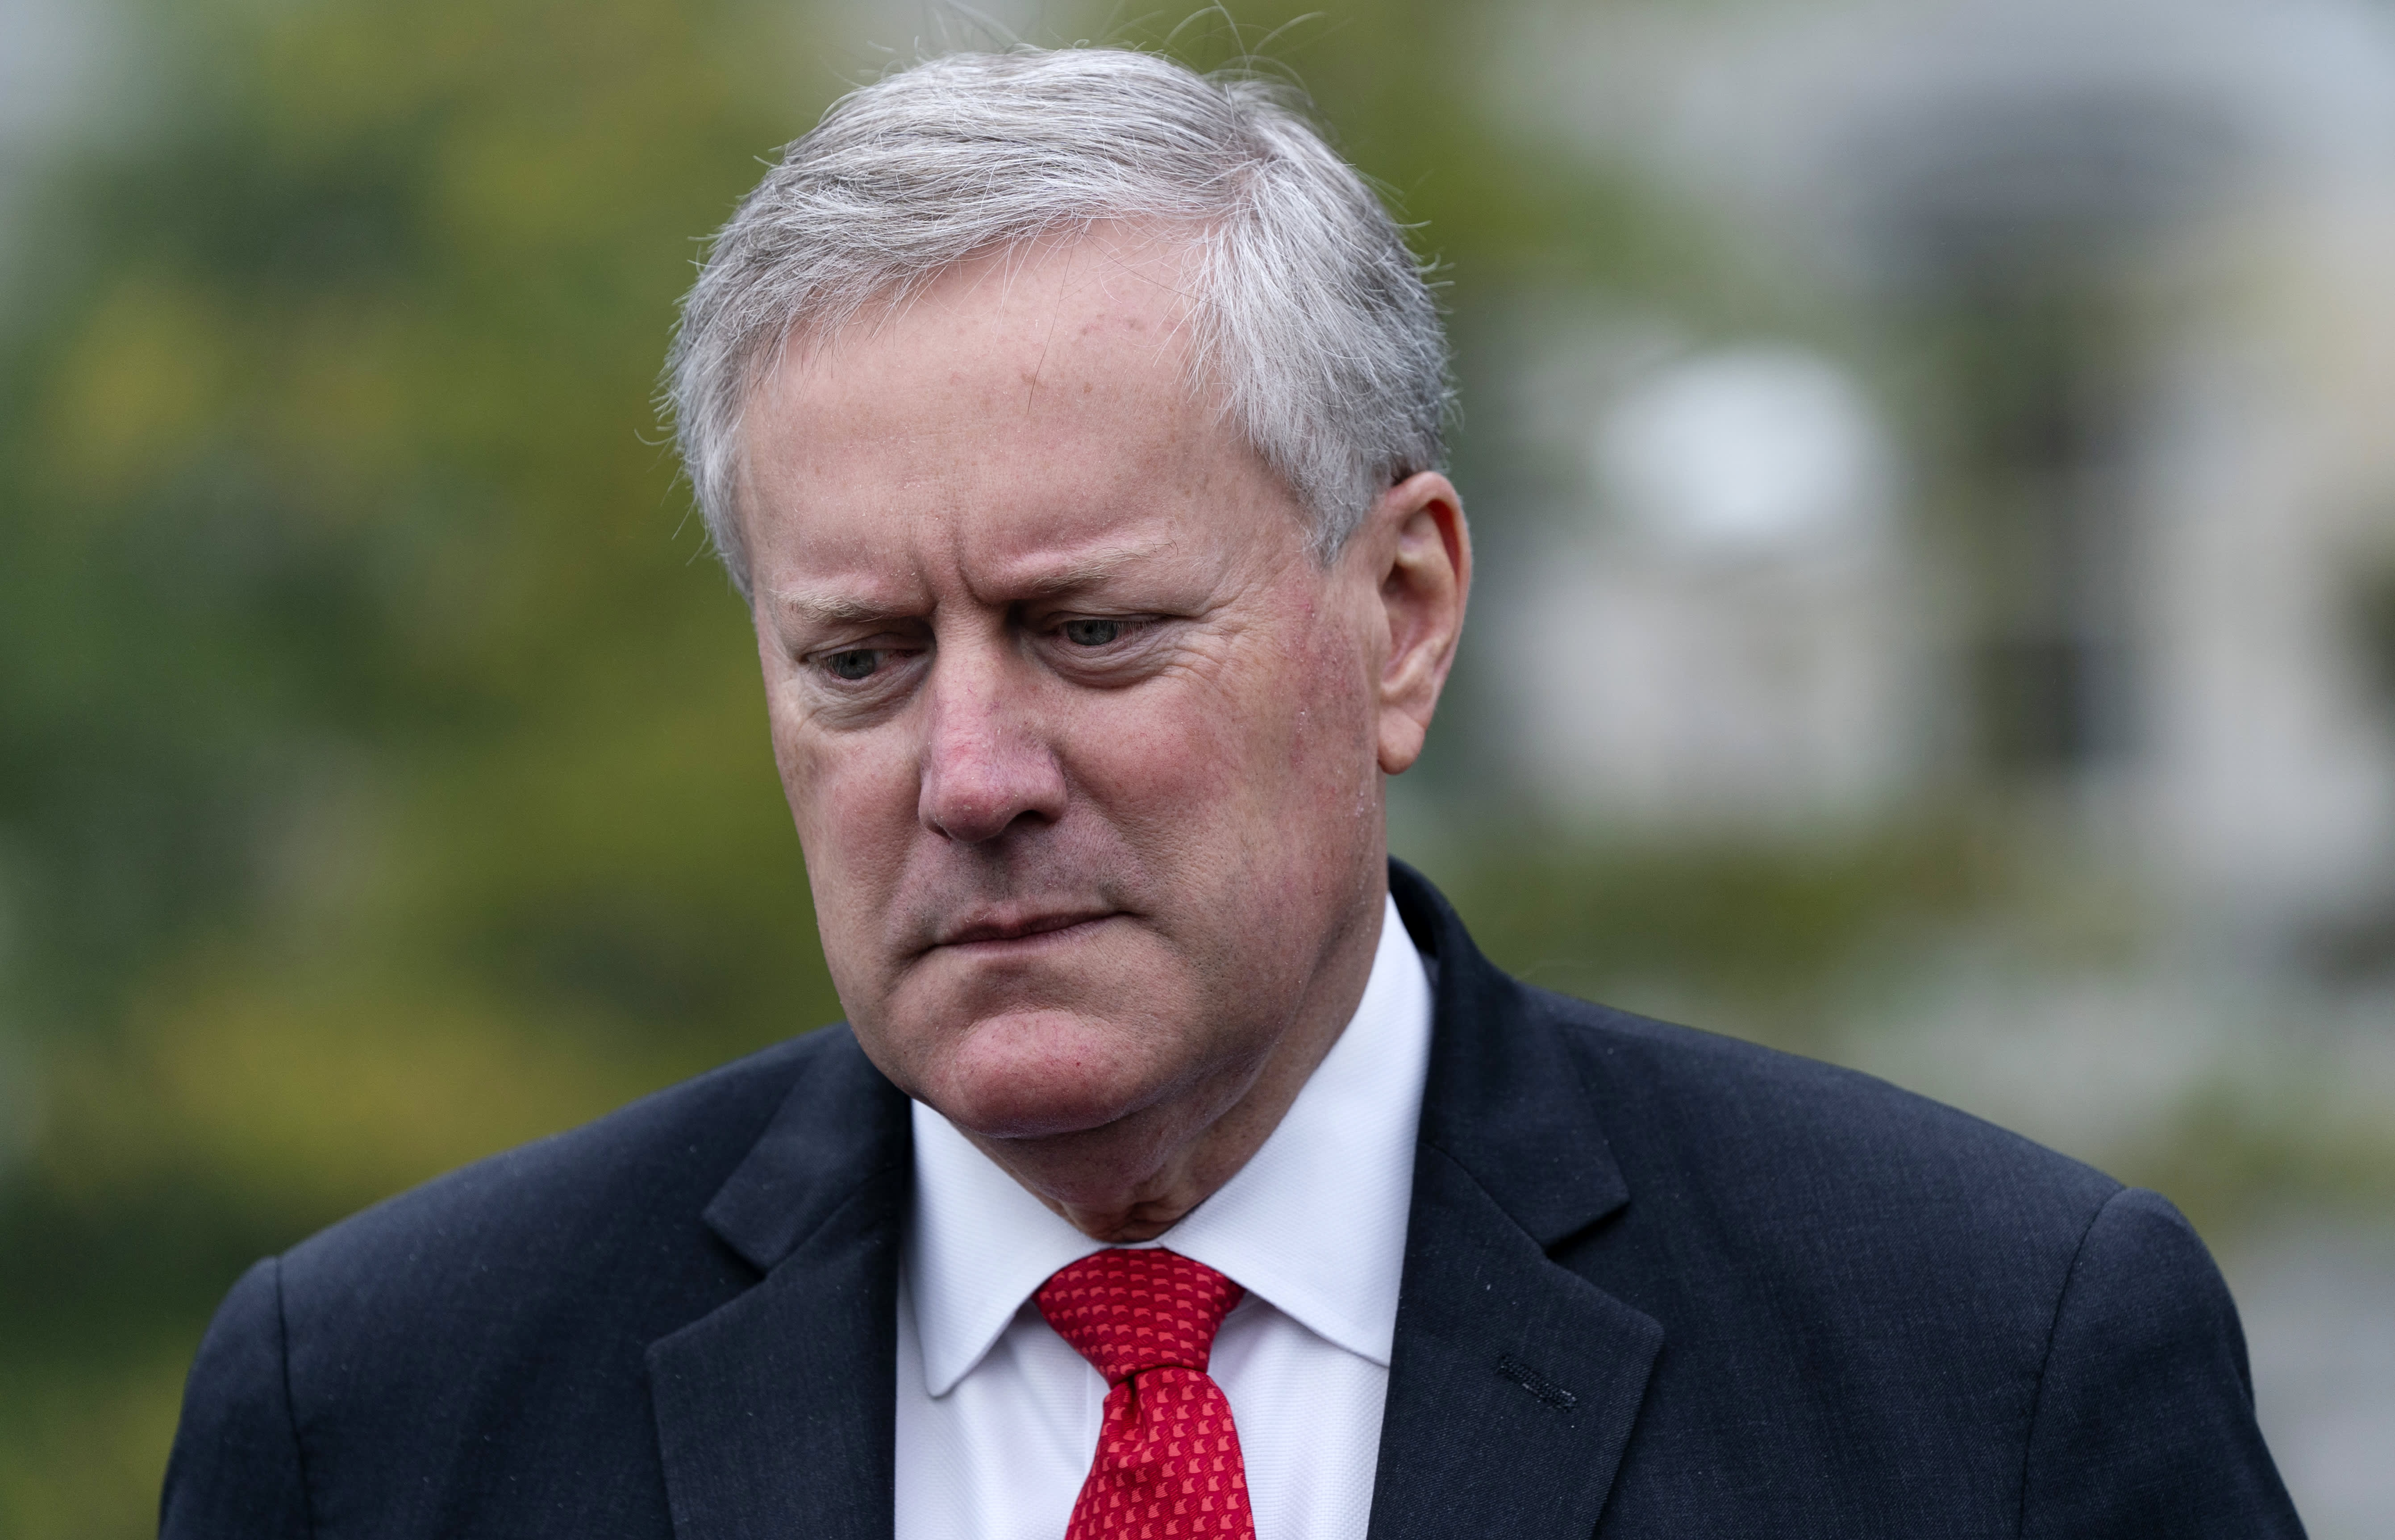 House Jan. 6 probe sheds light on Trump aide Mark Meadows’ records before contempt vote – CNBC